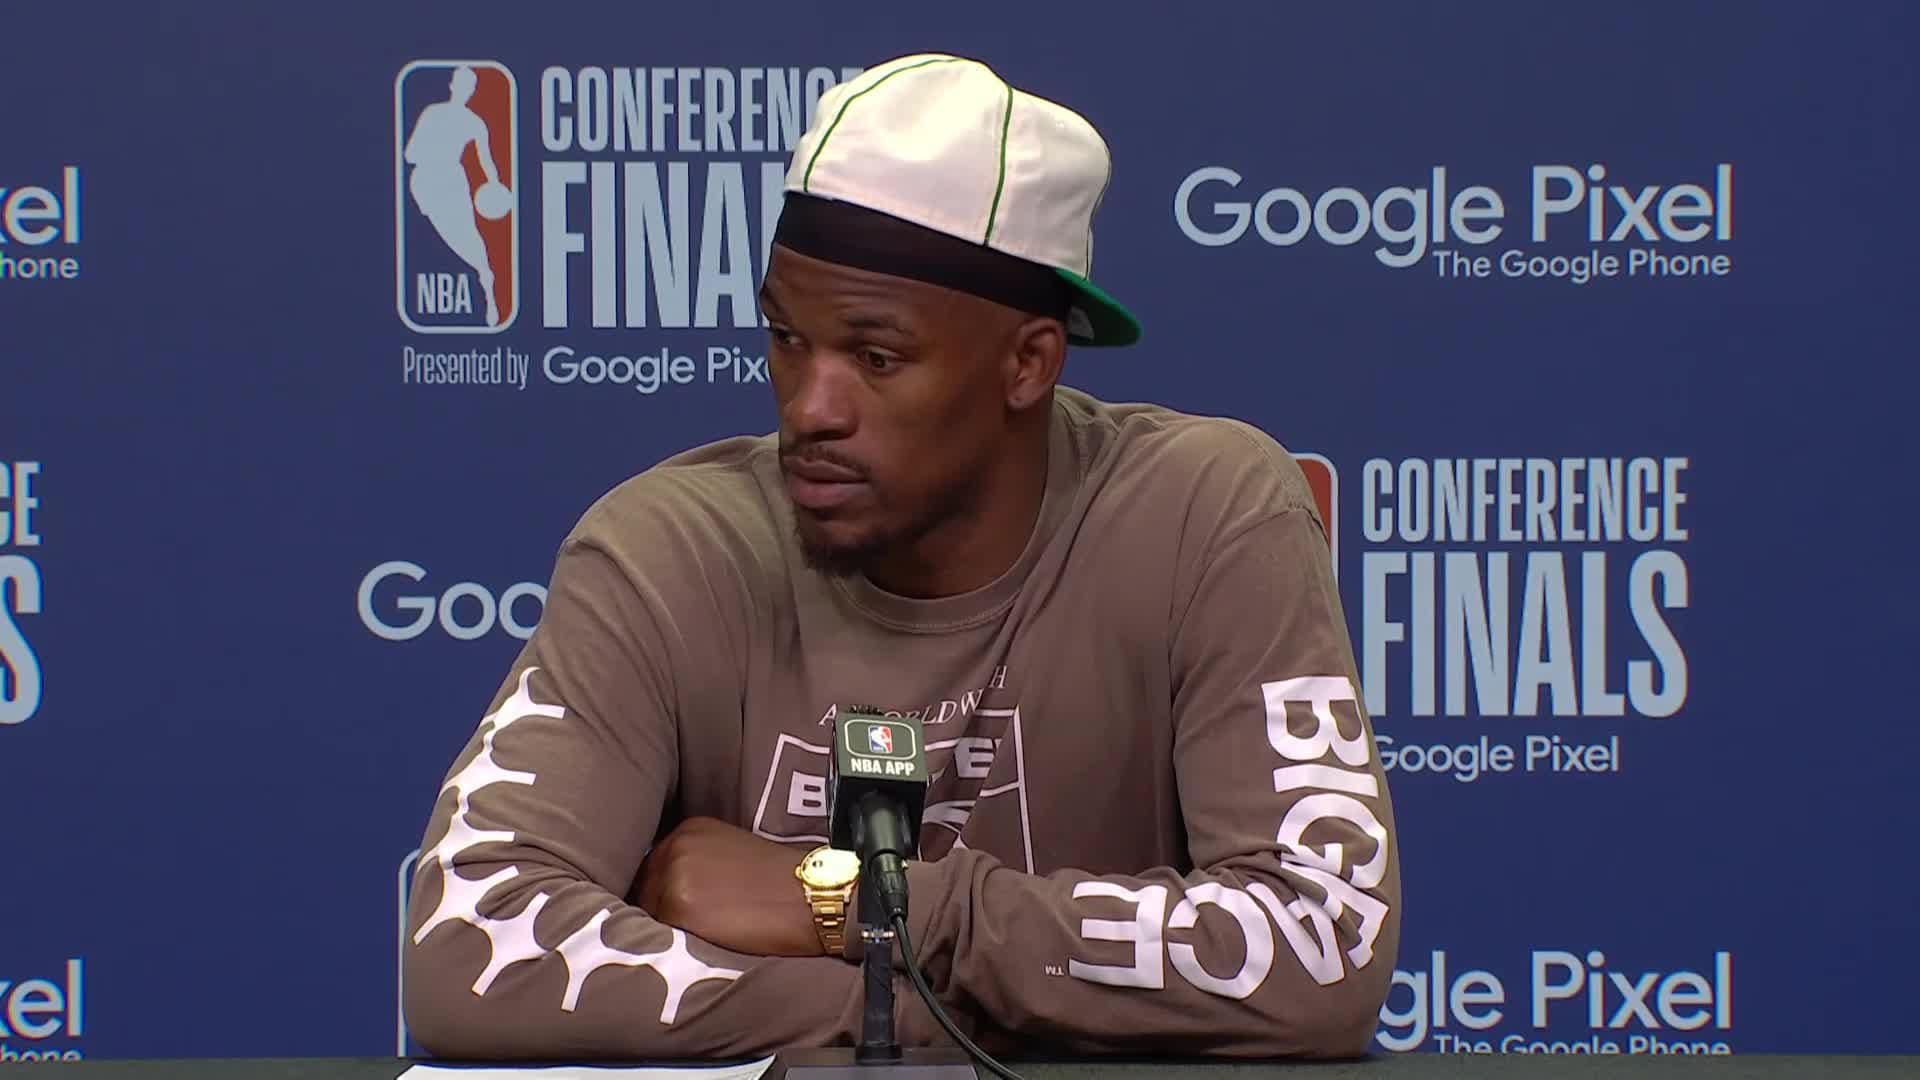 Jimmy Butler Took The Blame For Miami’s Game 6 Loss: ‘If I Play Better, We’re Not Even In This Position’ [Video]